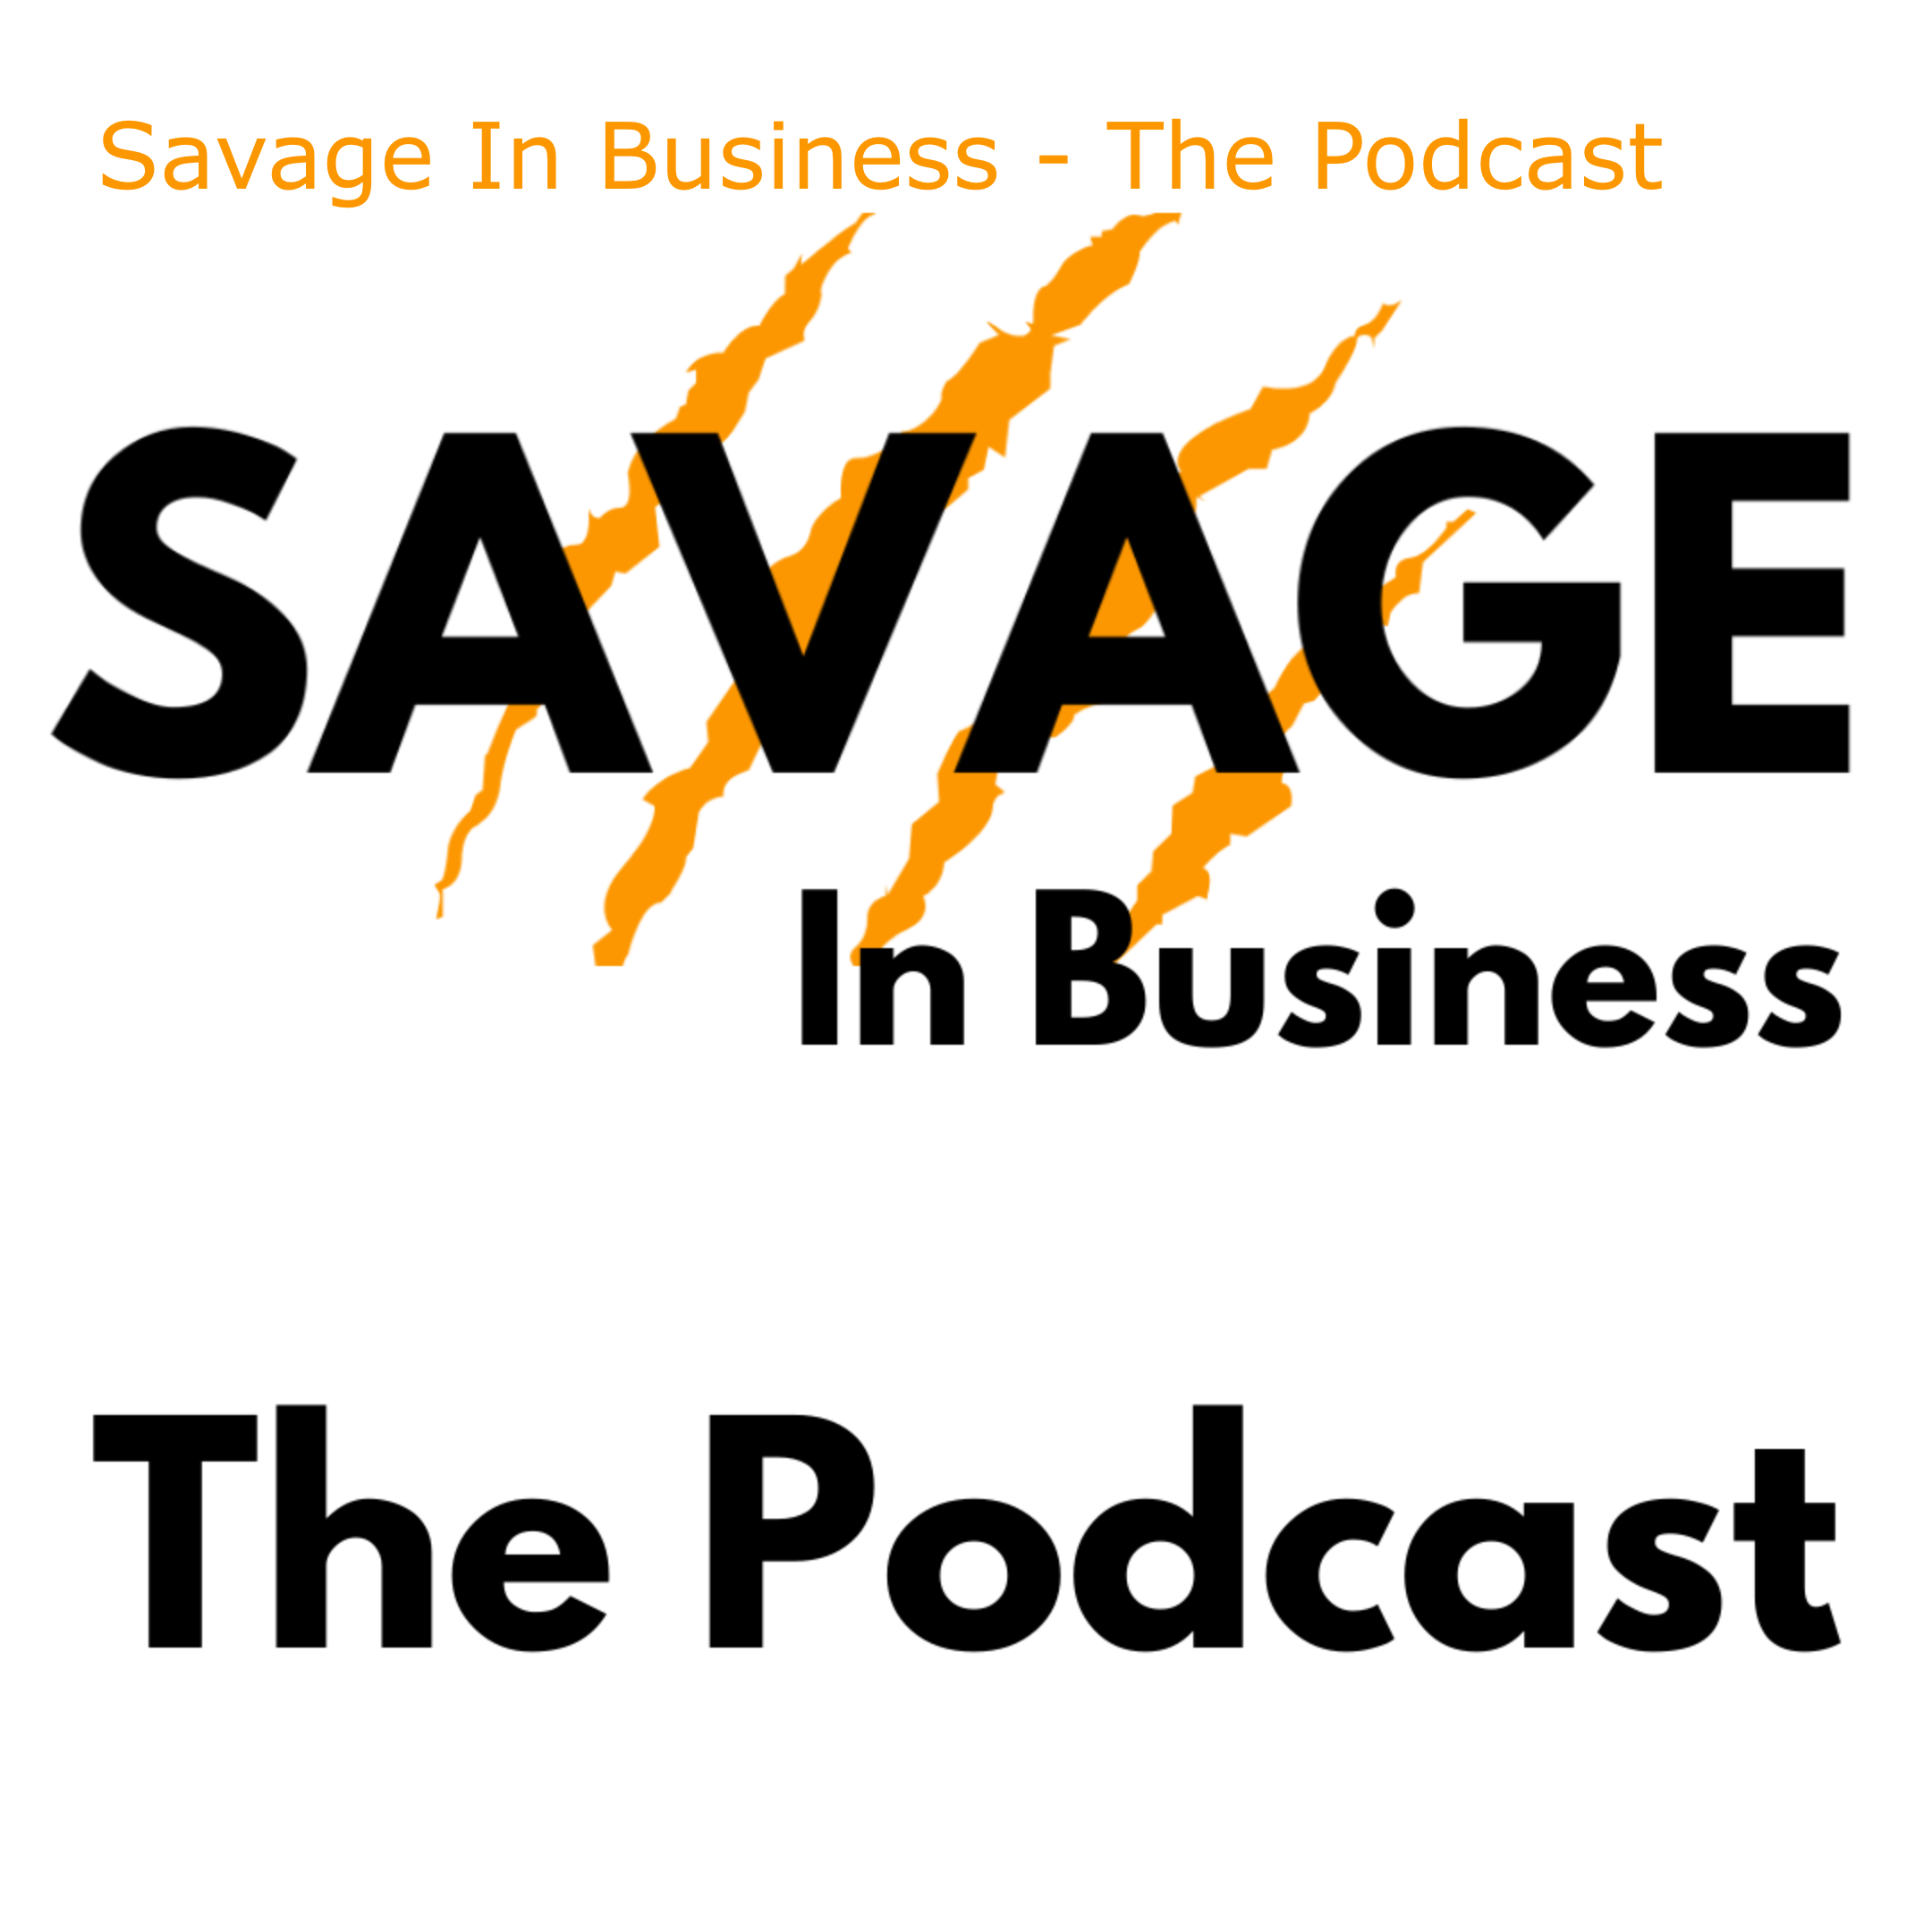 Savage In Business - The Podcast